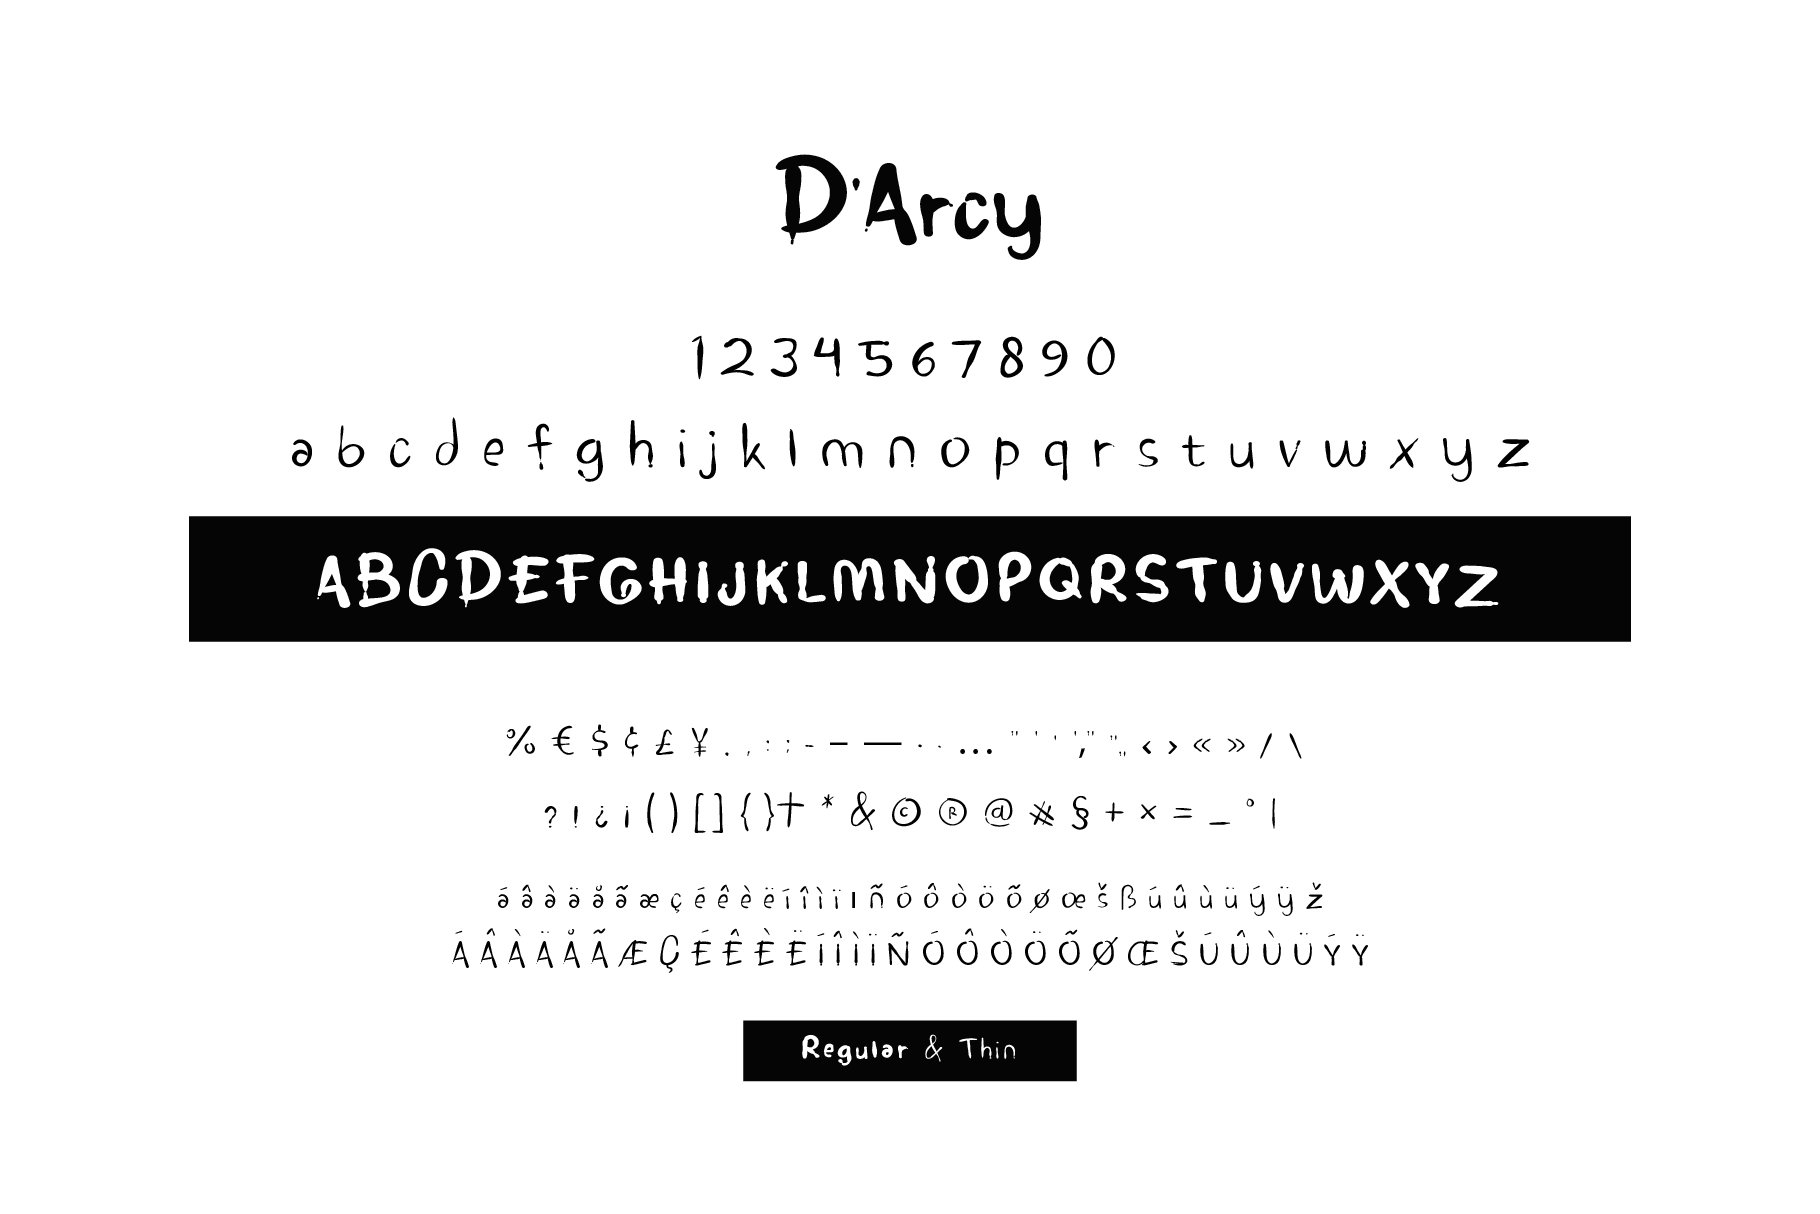 preview darcy 28829 829